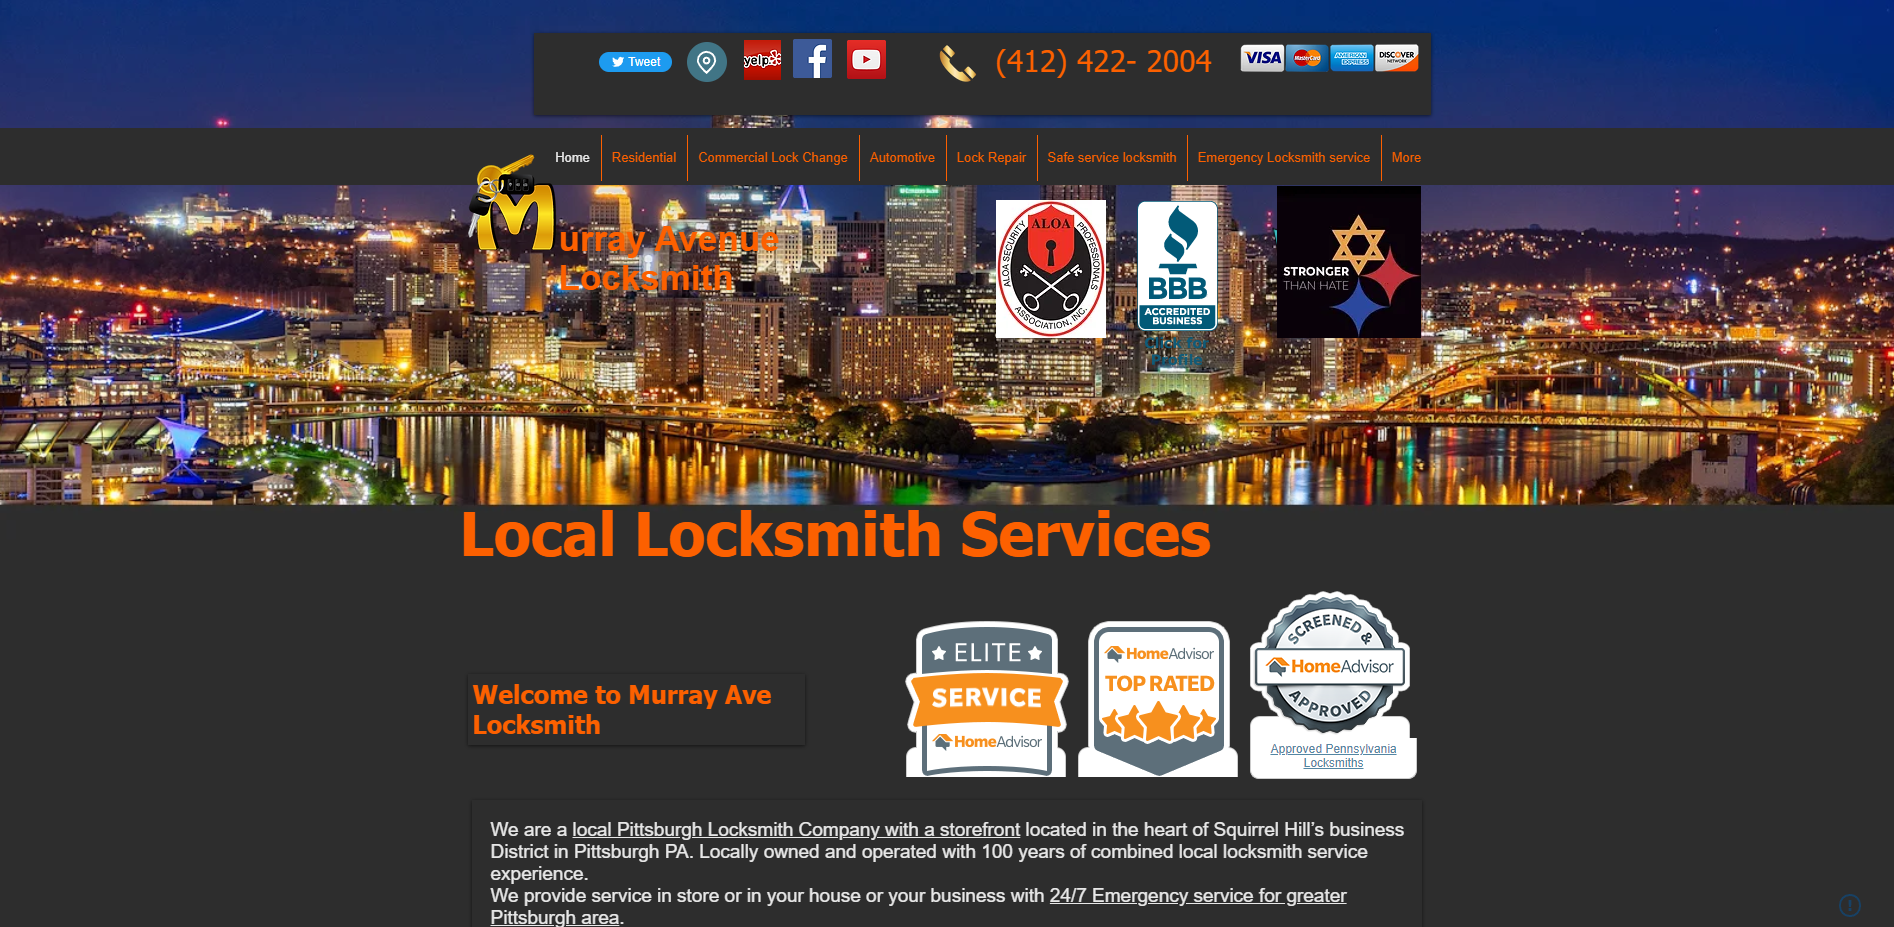 Top Locksmith in Pittsburgh